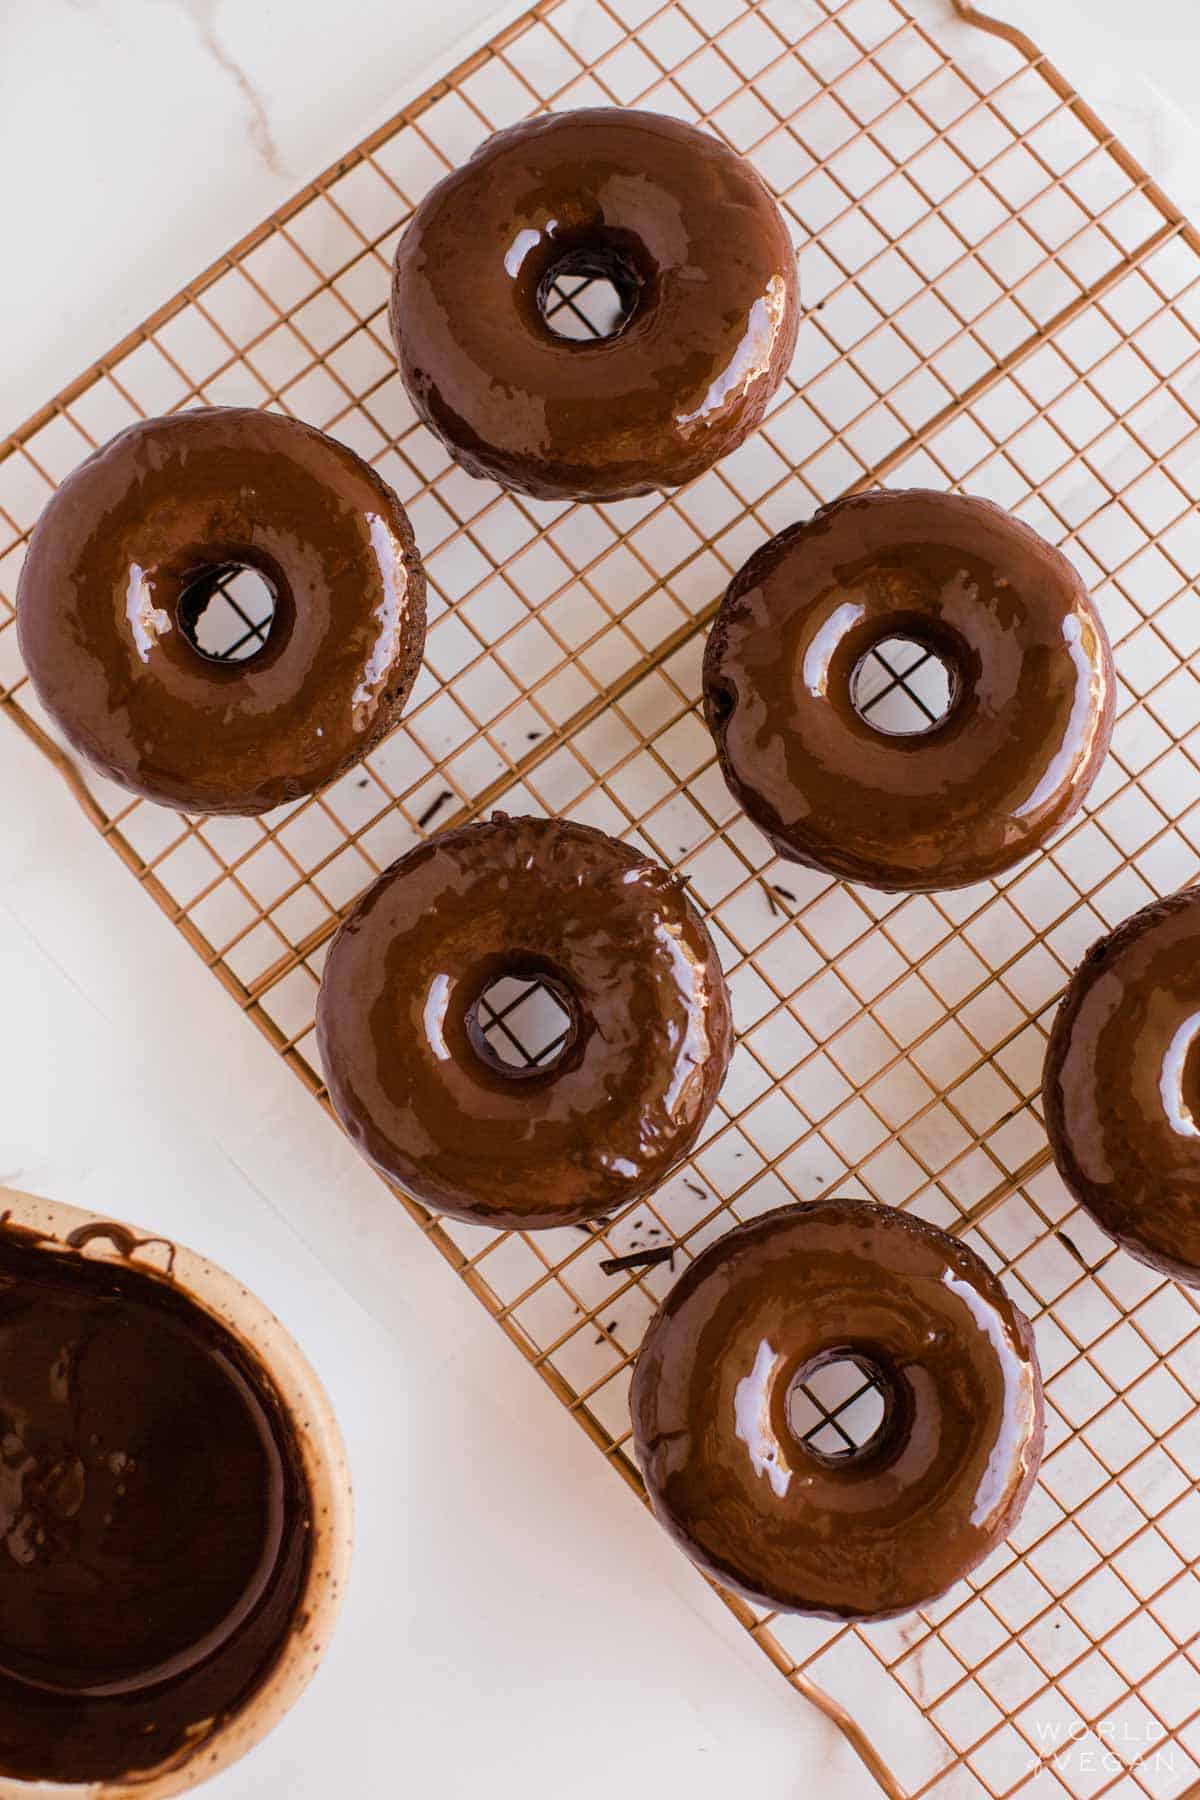 Frosted double chocolate donuts